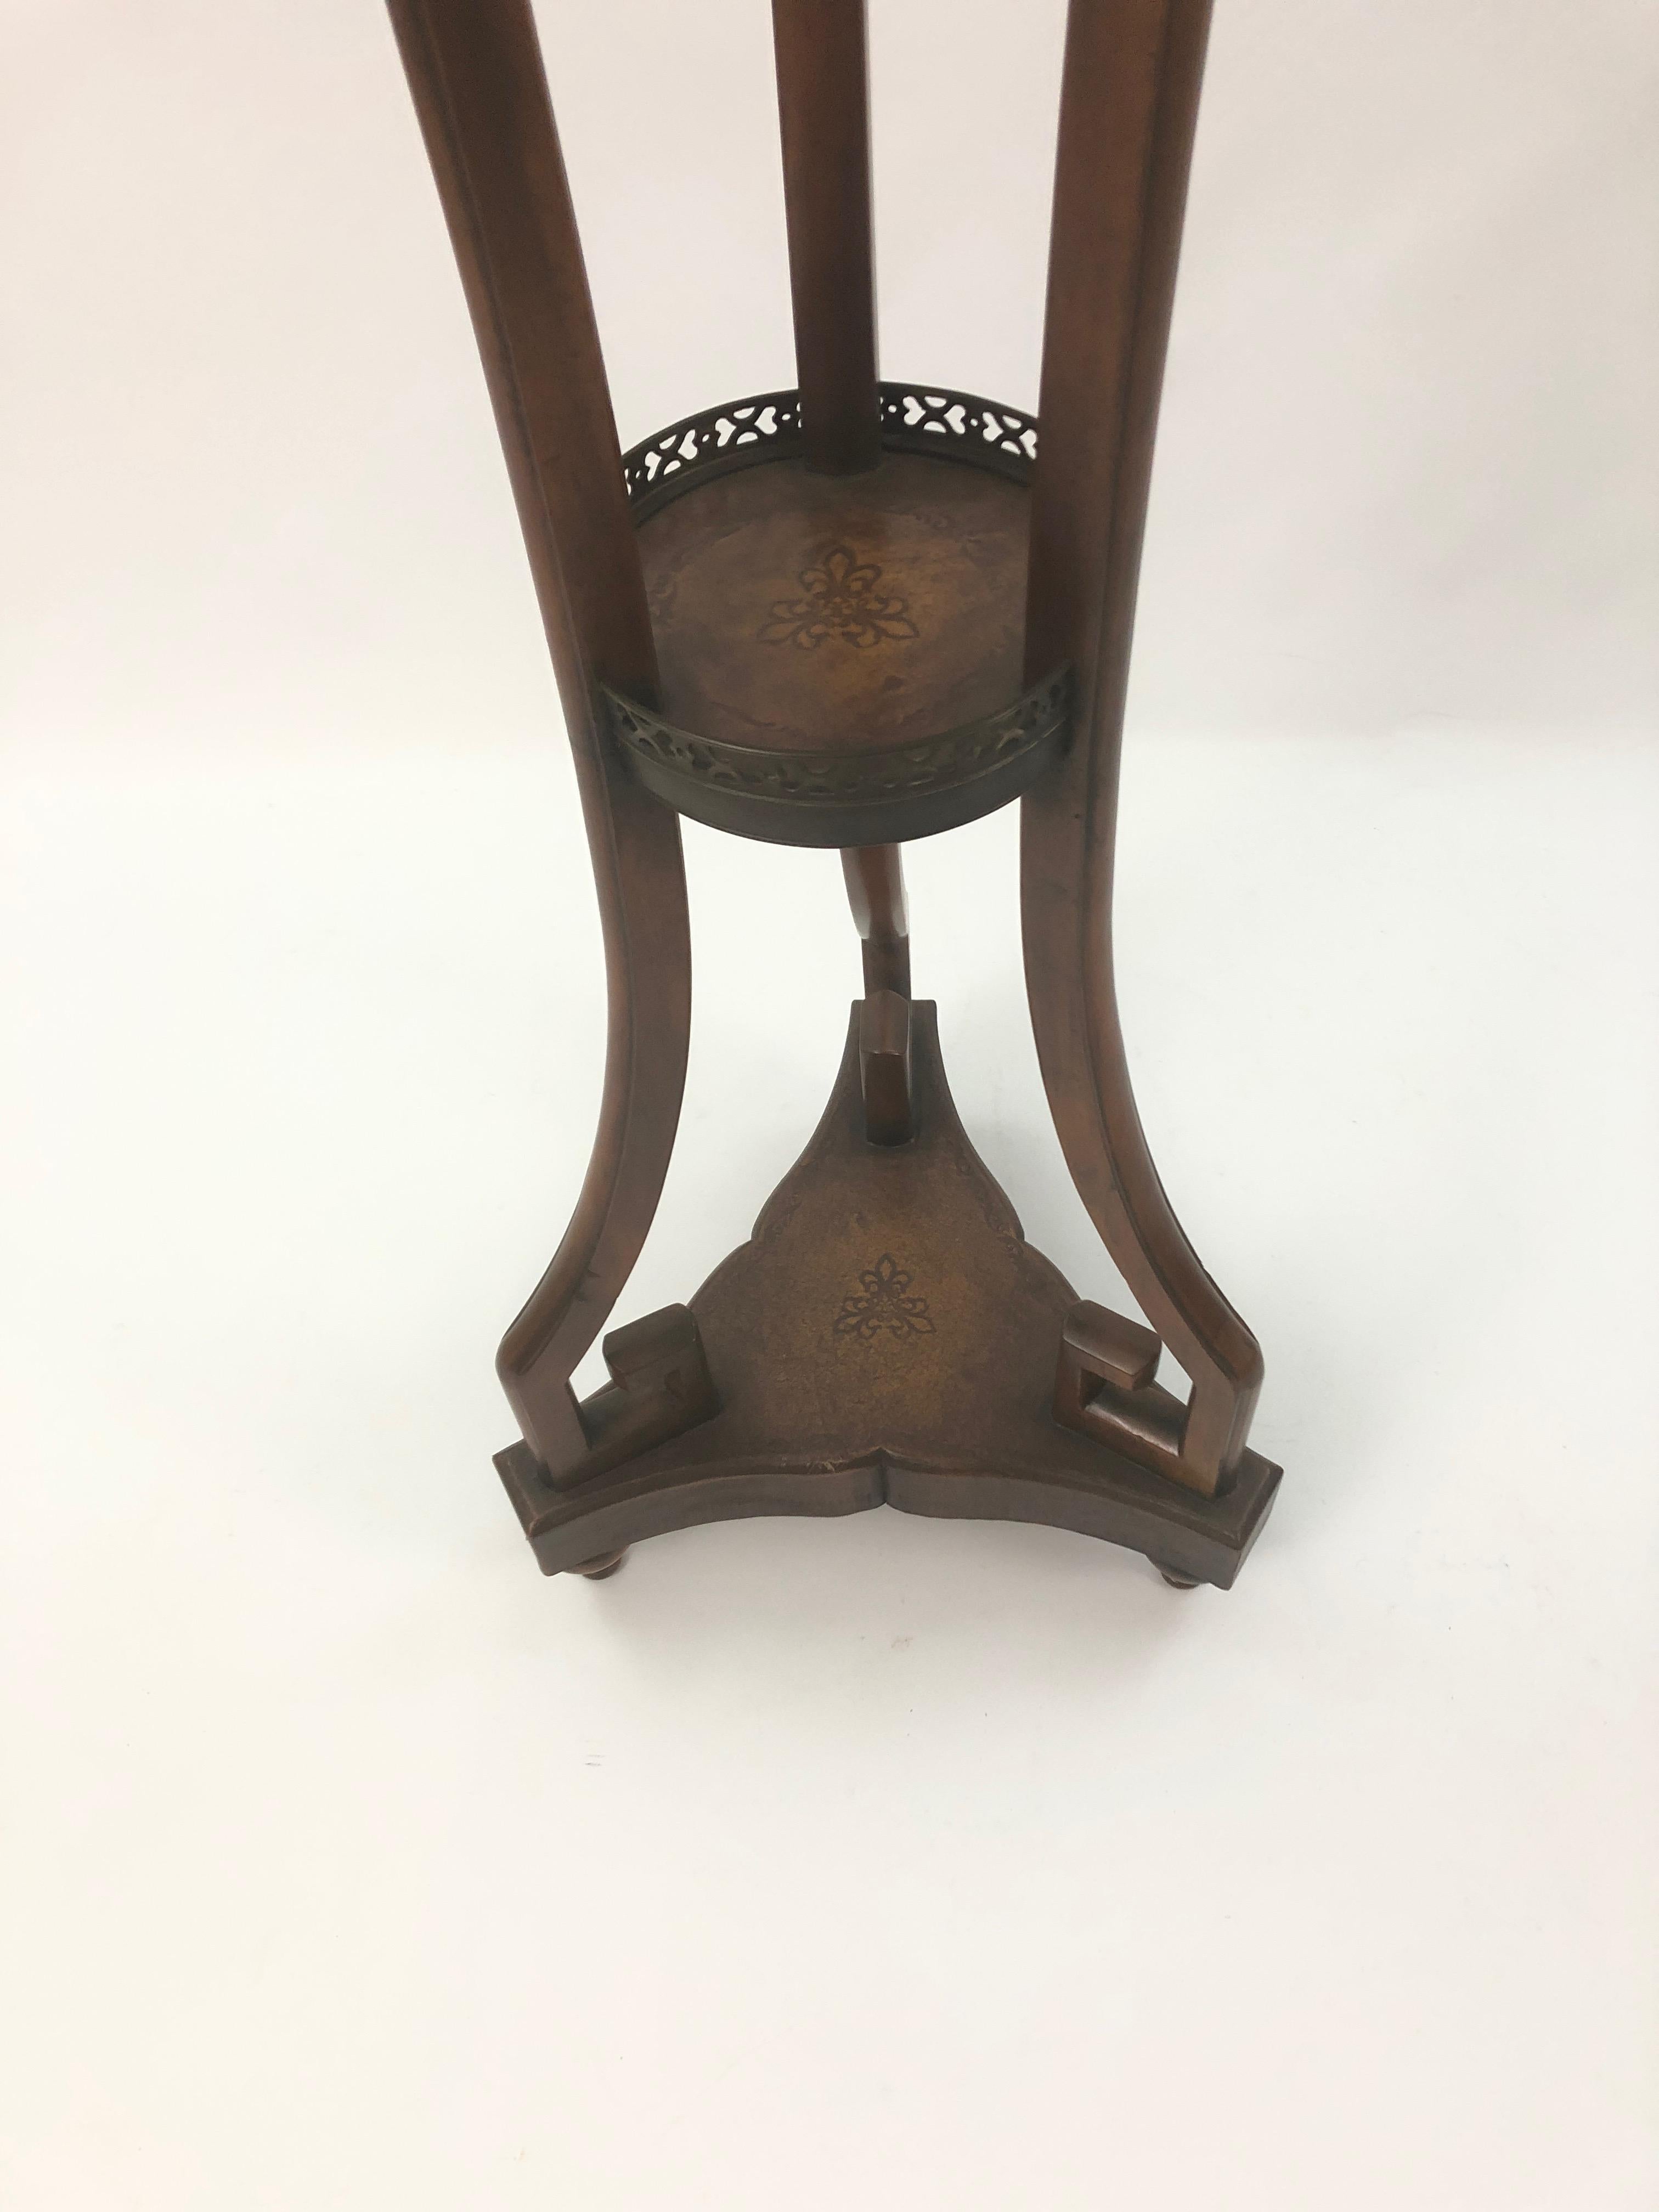 Handsome elongated mahogany stand having a marble round top with brass gallery and tooled leather lower tier with stunning Greek key inspired supports.
Bottom is 15 diameter
Top is 12.25 diameter.